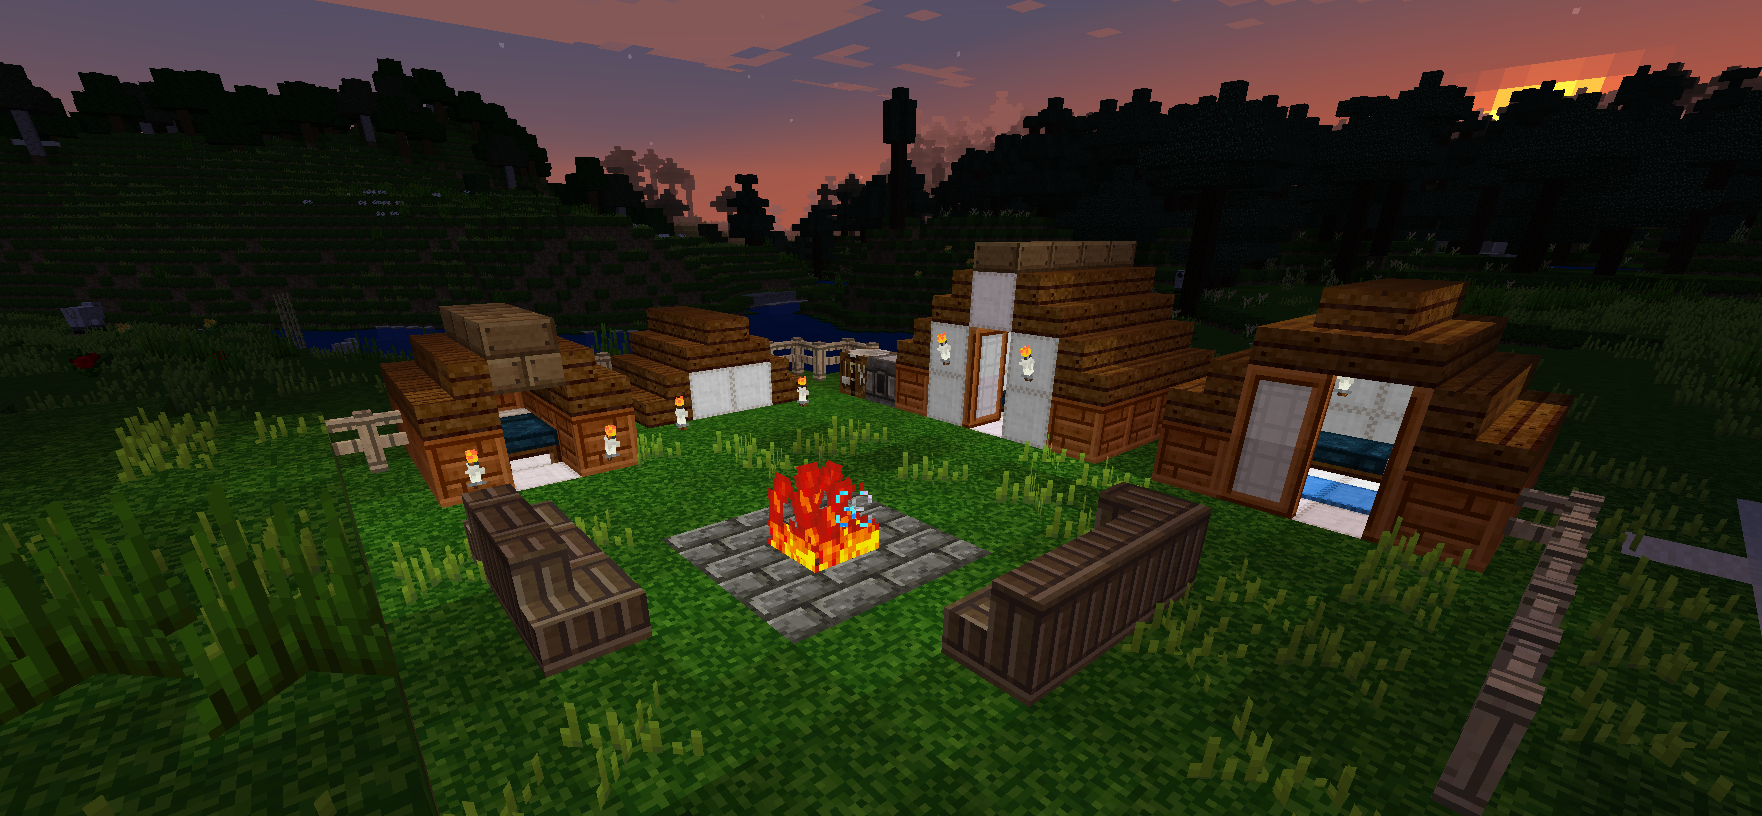 Tents, Alternative To Beds. - Suggestions - Minecraft ...